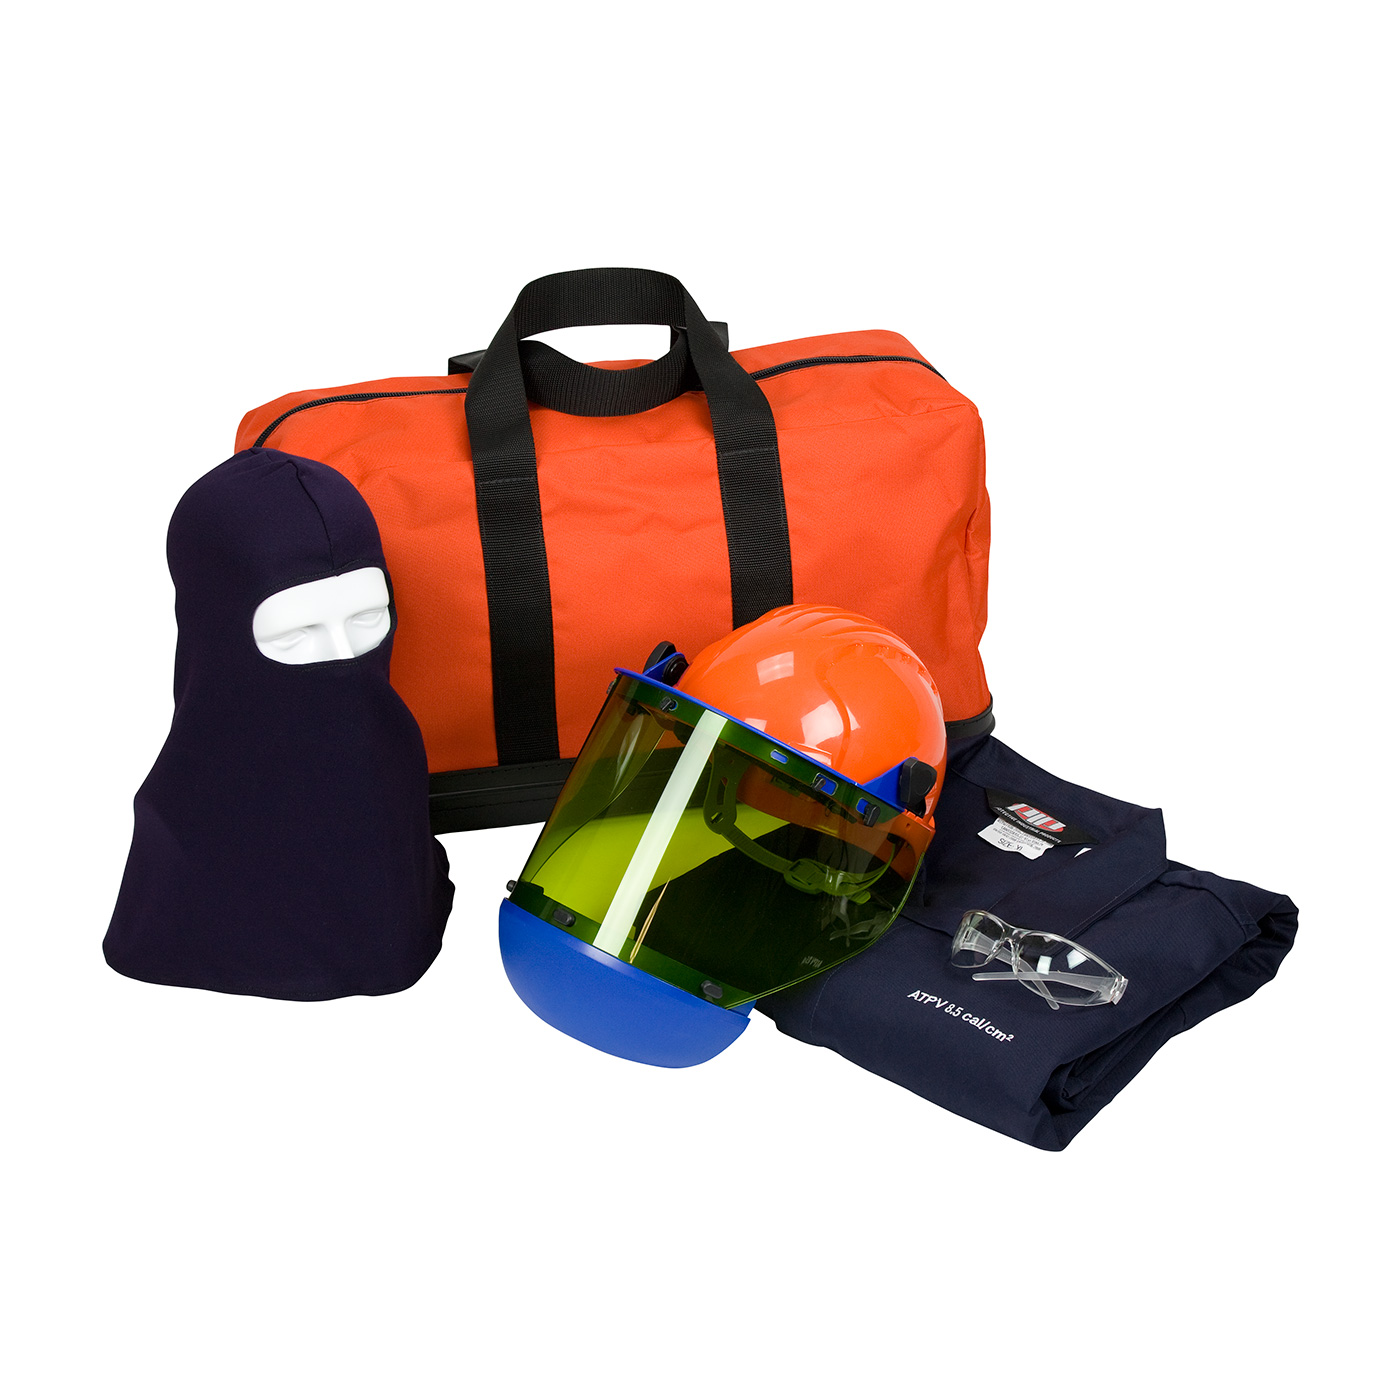 #9150-5388E PIP® PPE 2 AR/FR Dual Certified Kit - 8 Cal/cm2 contains dual certified coverall, hard hat with arc shield, balaclava, safety glasses and carry bag

